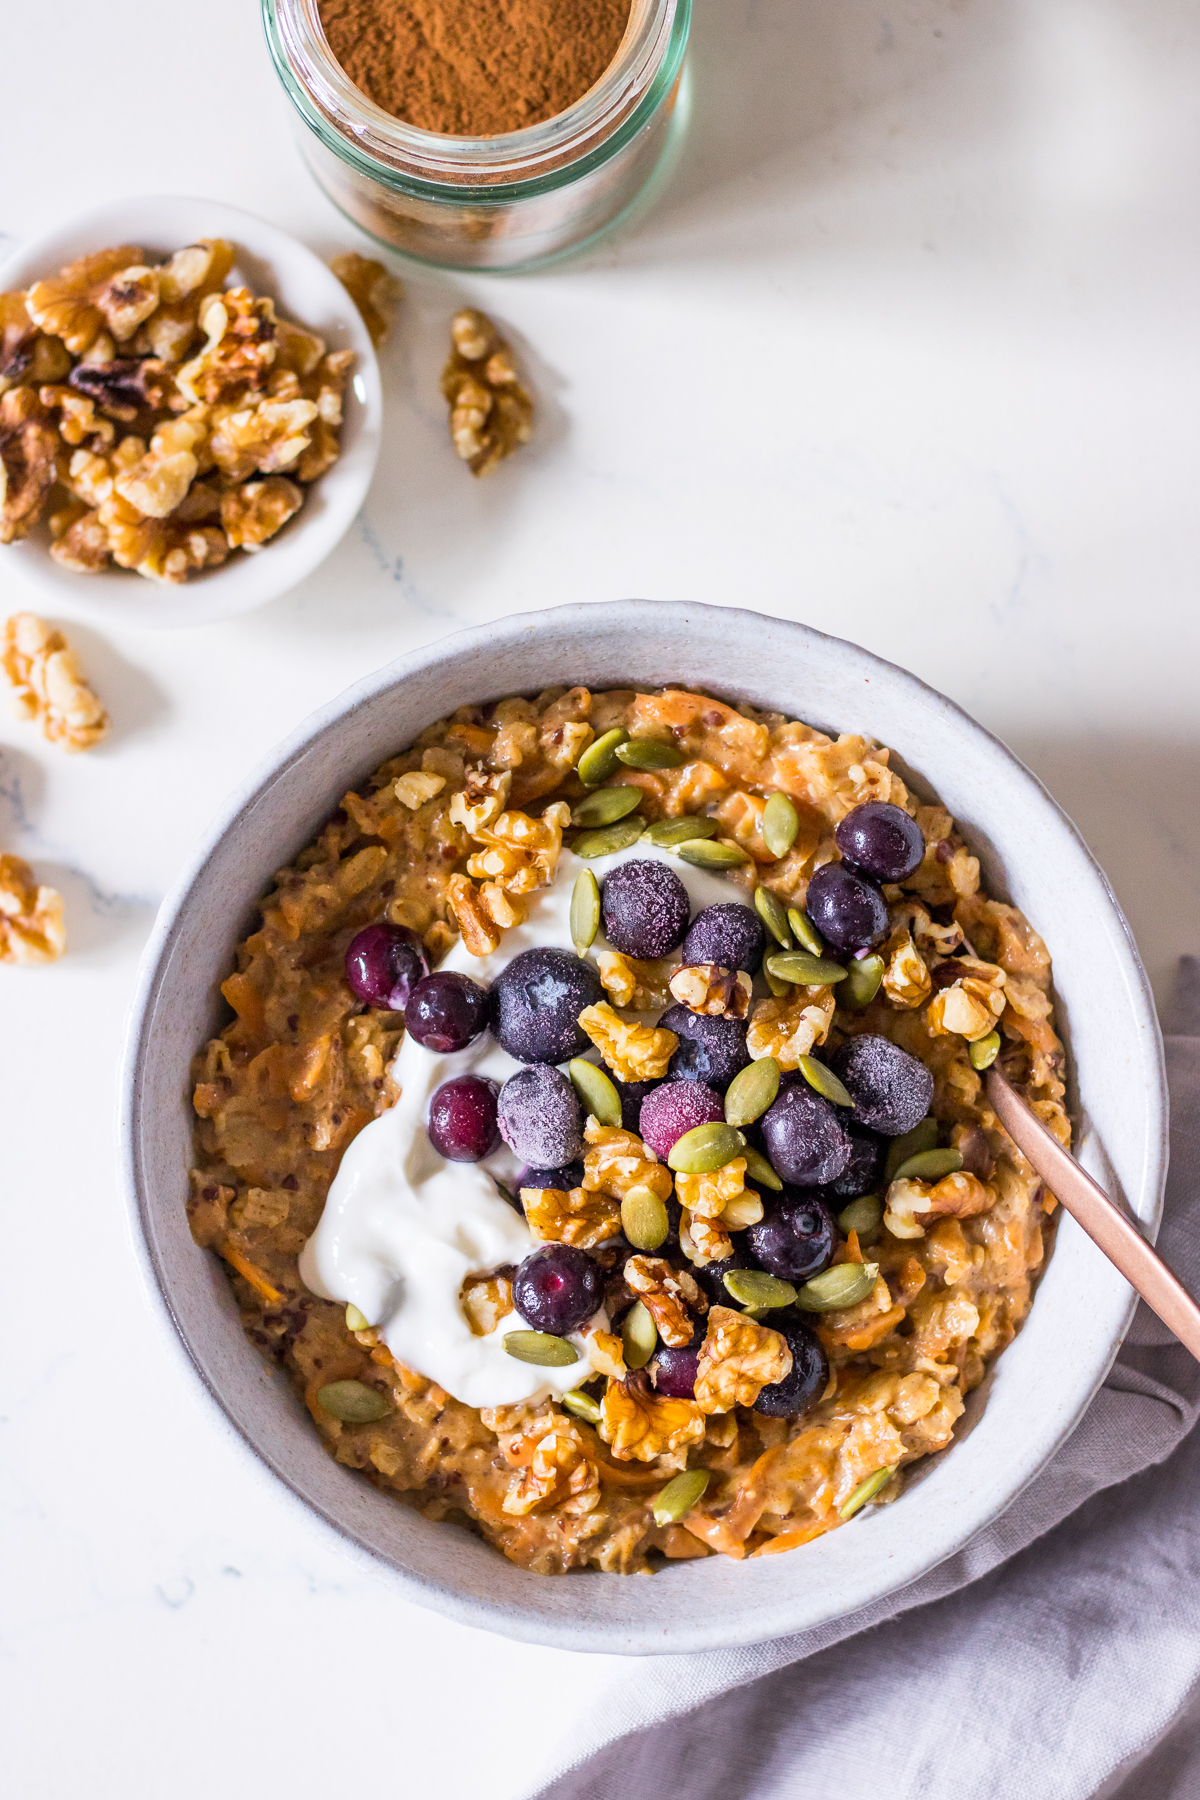 Carrot cake porridge in a small bowl with yoghurt, blueberries, nuts and seeds on top